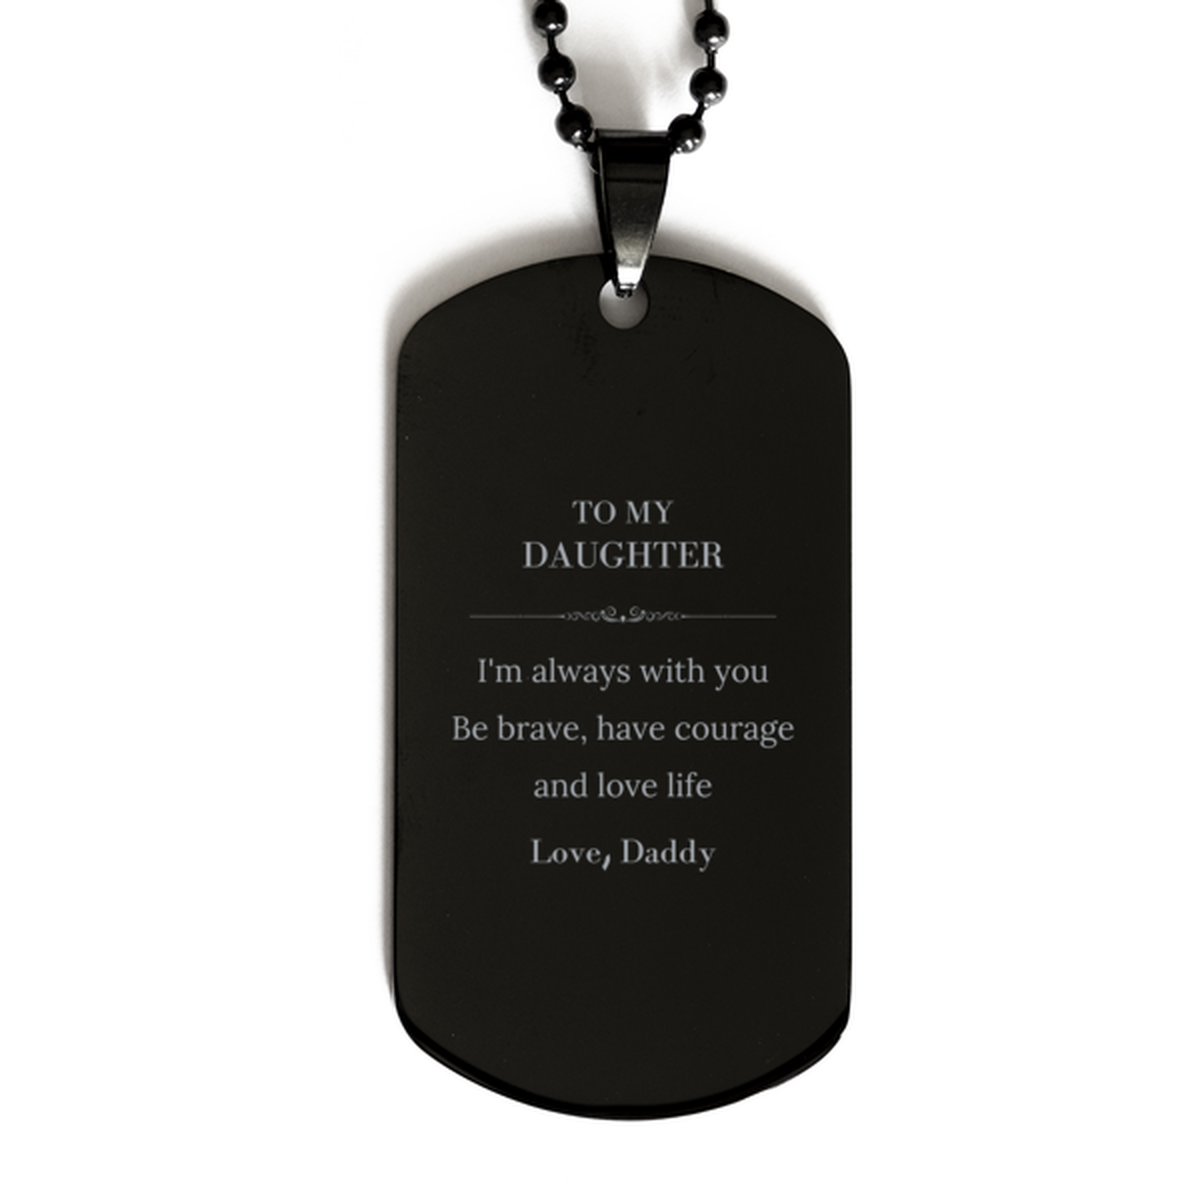 To My Daughter Gifts from Daddy, Unique Black Dog Tag Inspirational Christmas Birthday Graduation Gifts for Daughter I'm always with you. Be brave, have courage and love life. Love, Daddy